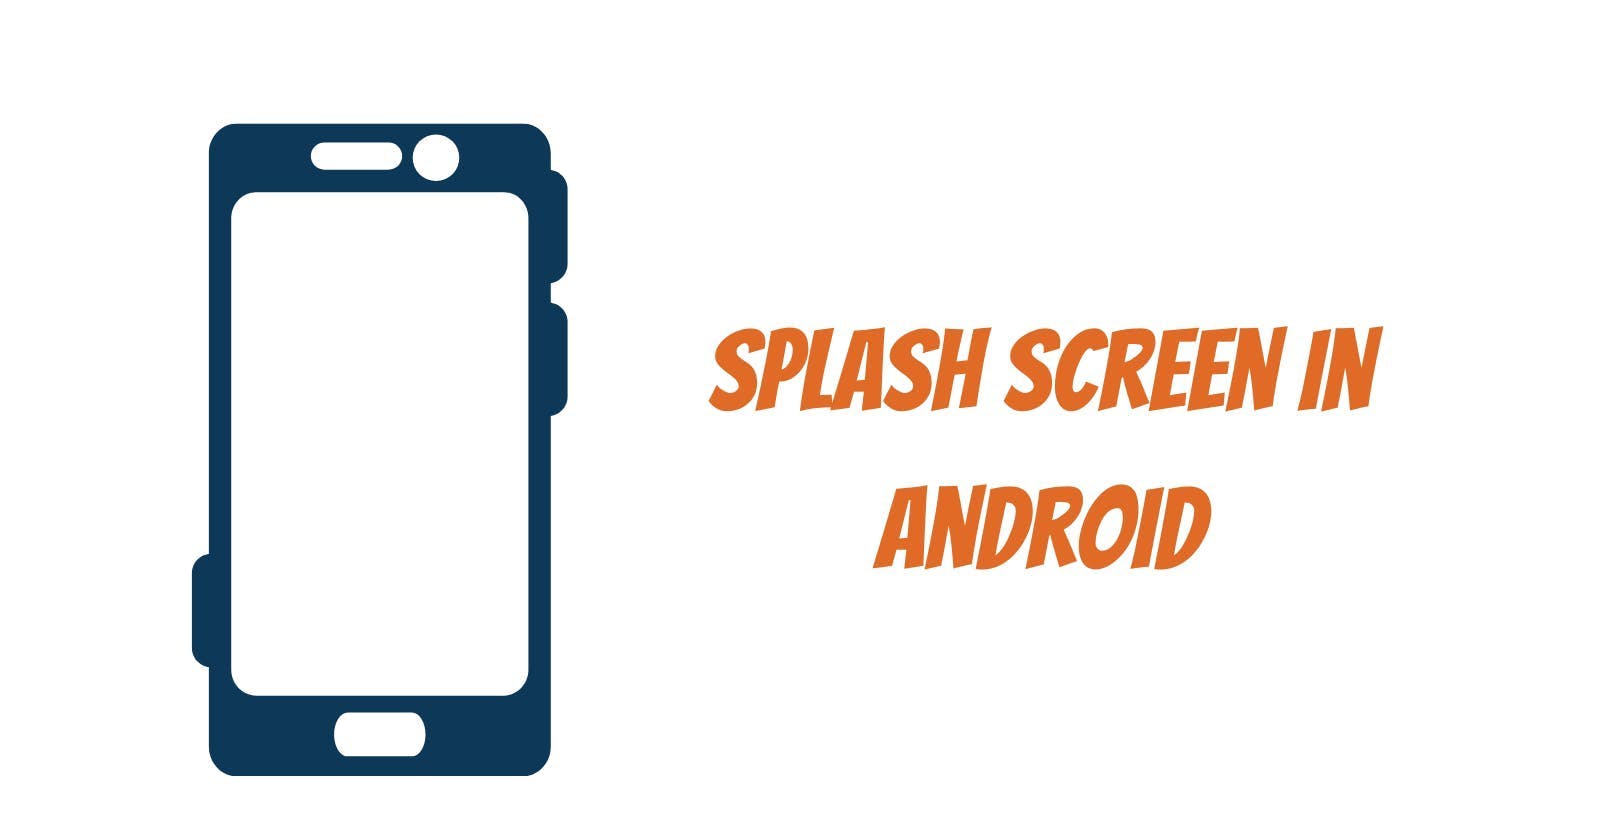 Splash screen in Android